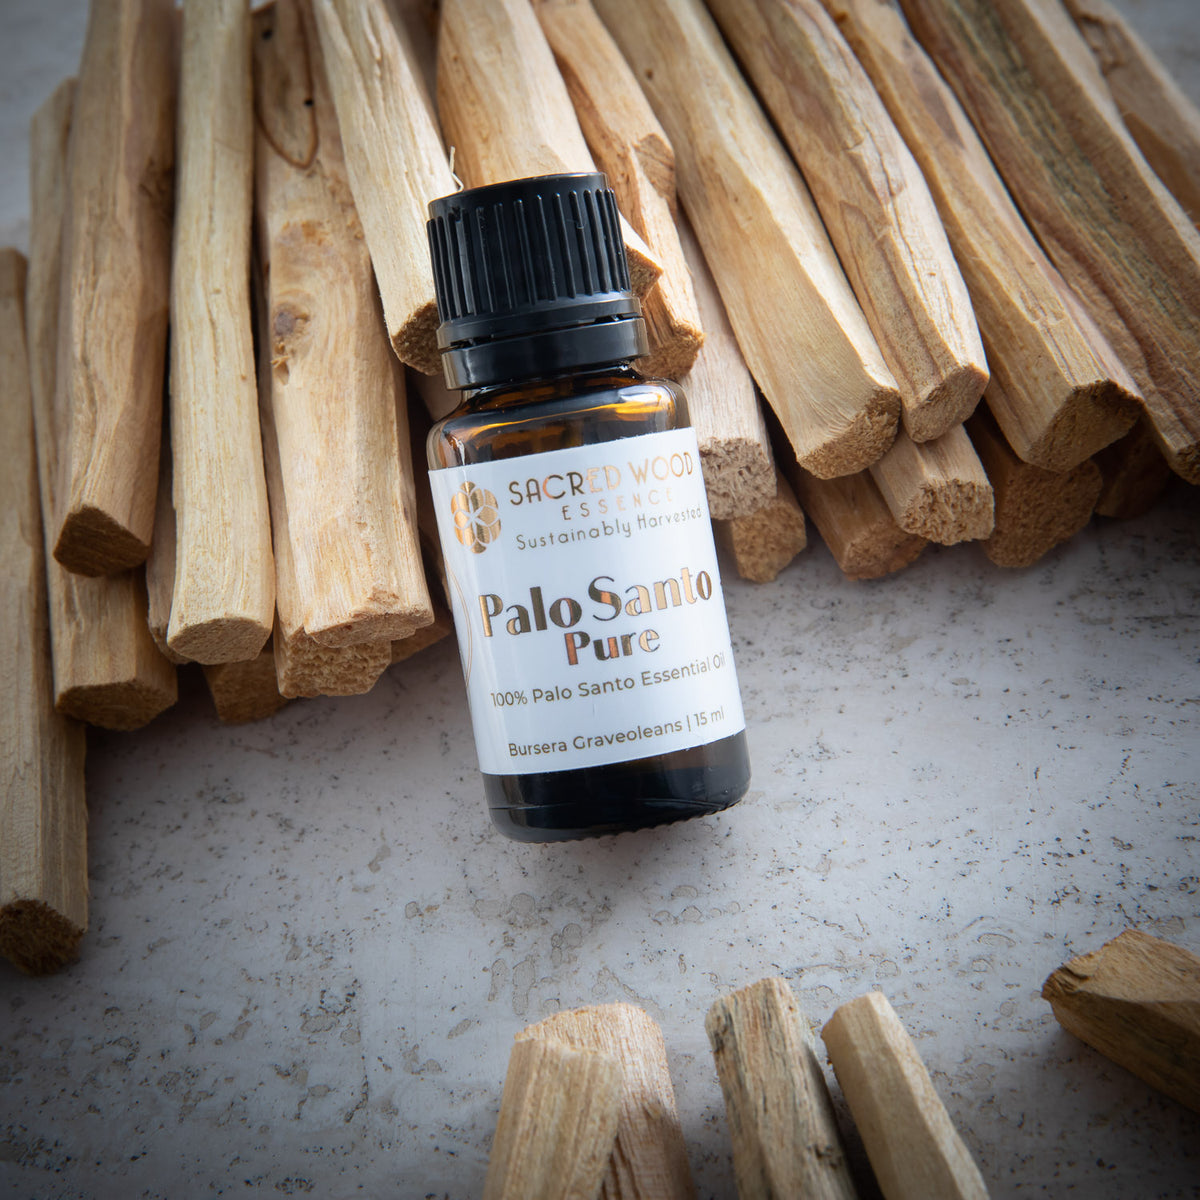 Palo Santo Essential Oil - Pure Organic Essential Oils for Diffuser -  Selecciòn Quality - Palo Santo Oil ideal for Aromatherapy and Stress Relief  - 2,5 ml